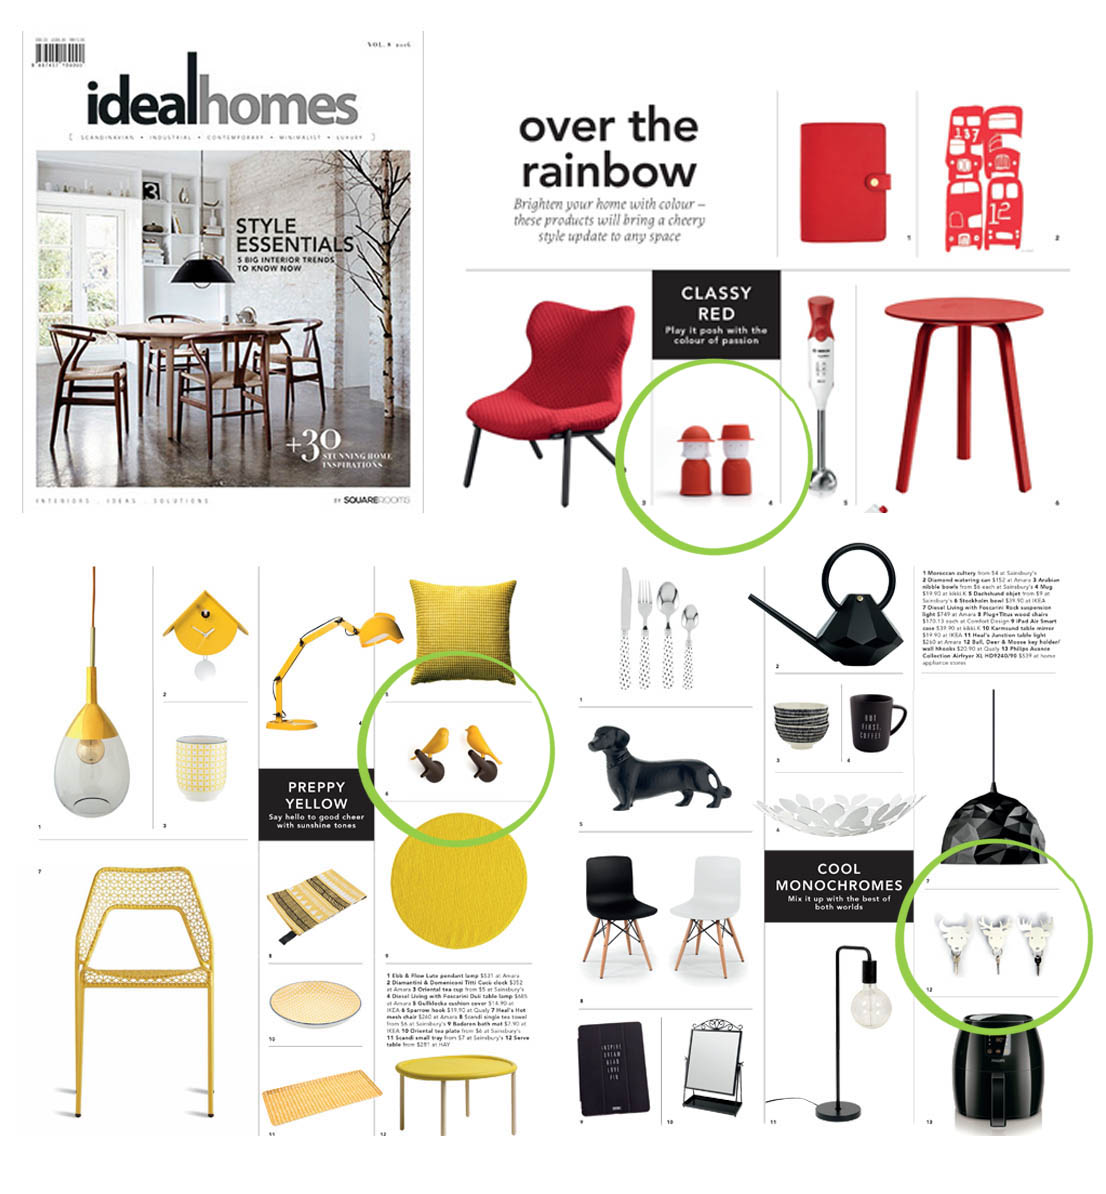 2016-ideal-homes-vol-8-collage